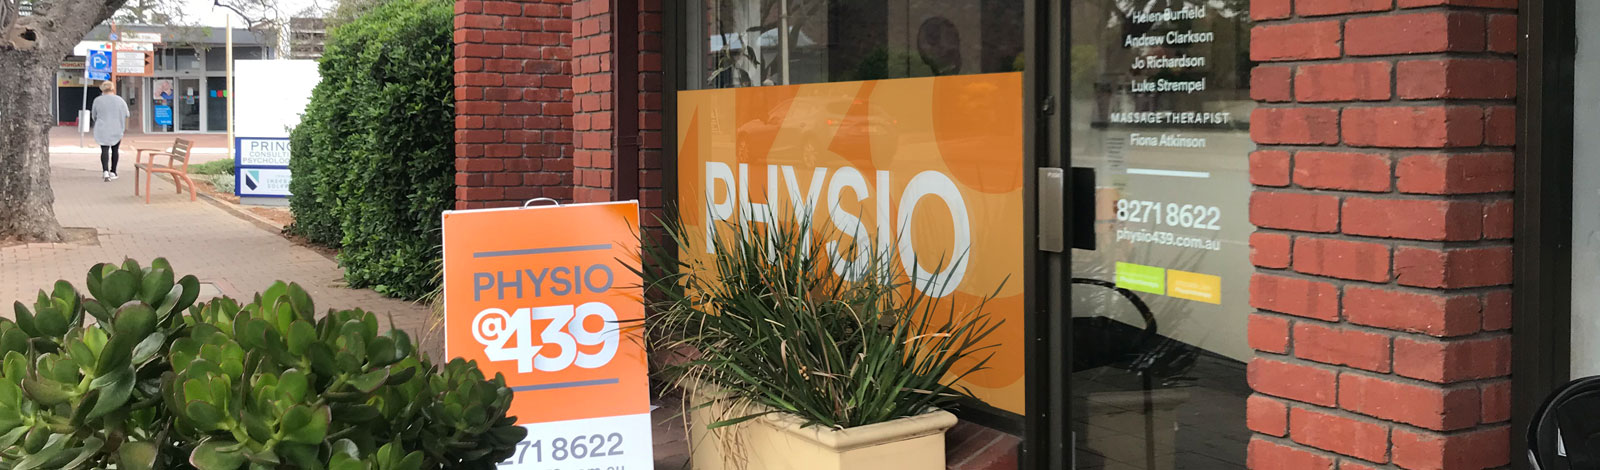 Adelaide Jaw Physiotherapy